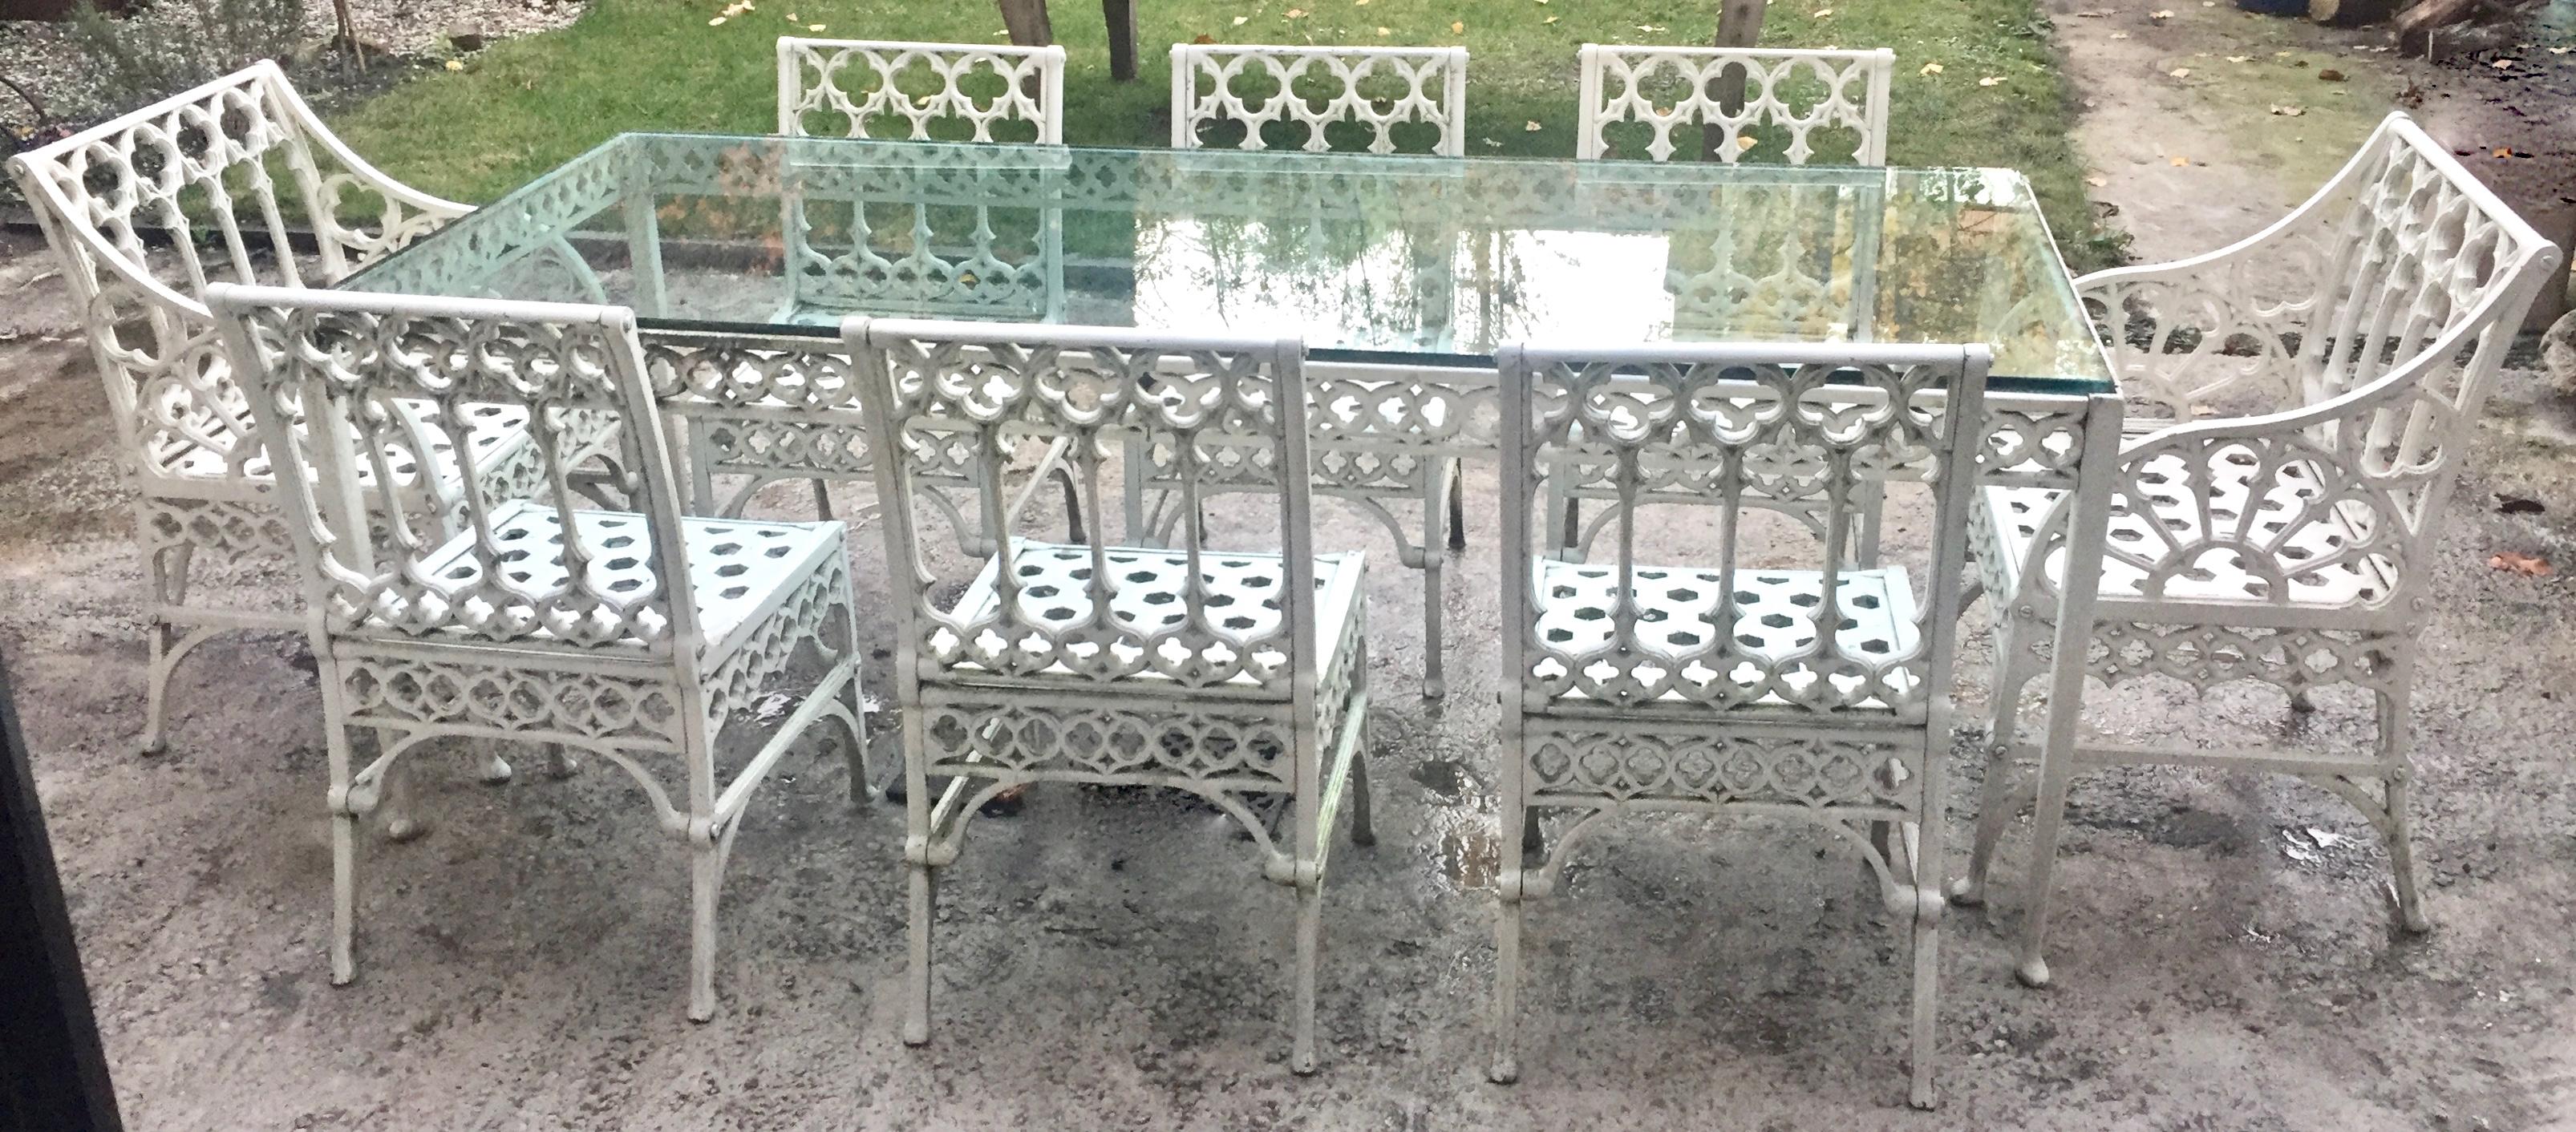 Fantastic cast metal garden set in the gothic revival style circa 1930. Use this set indoors or out.
The set consists of six side chairs, a pair of armchairs and glass top table.
The width of the seats are perfect (17-1/2